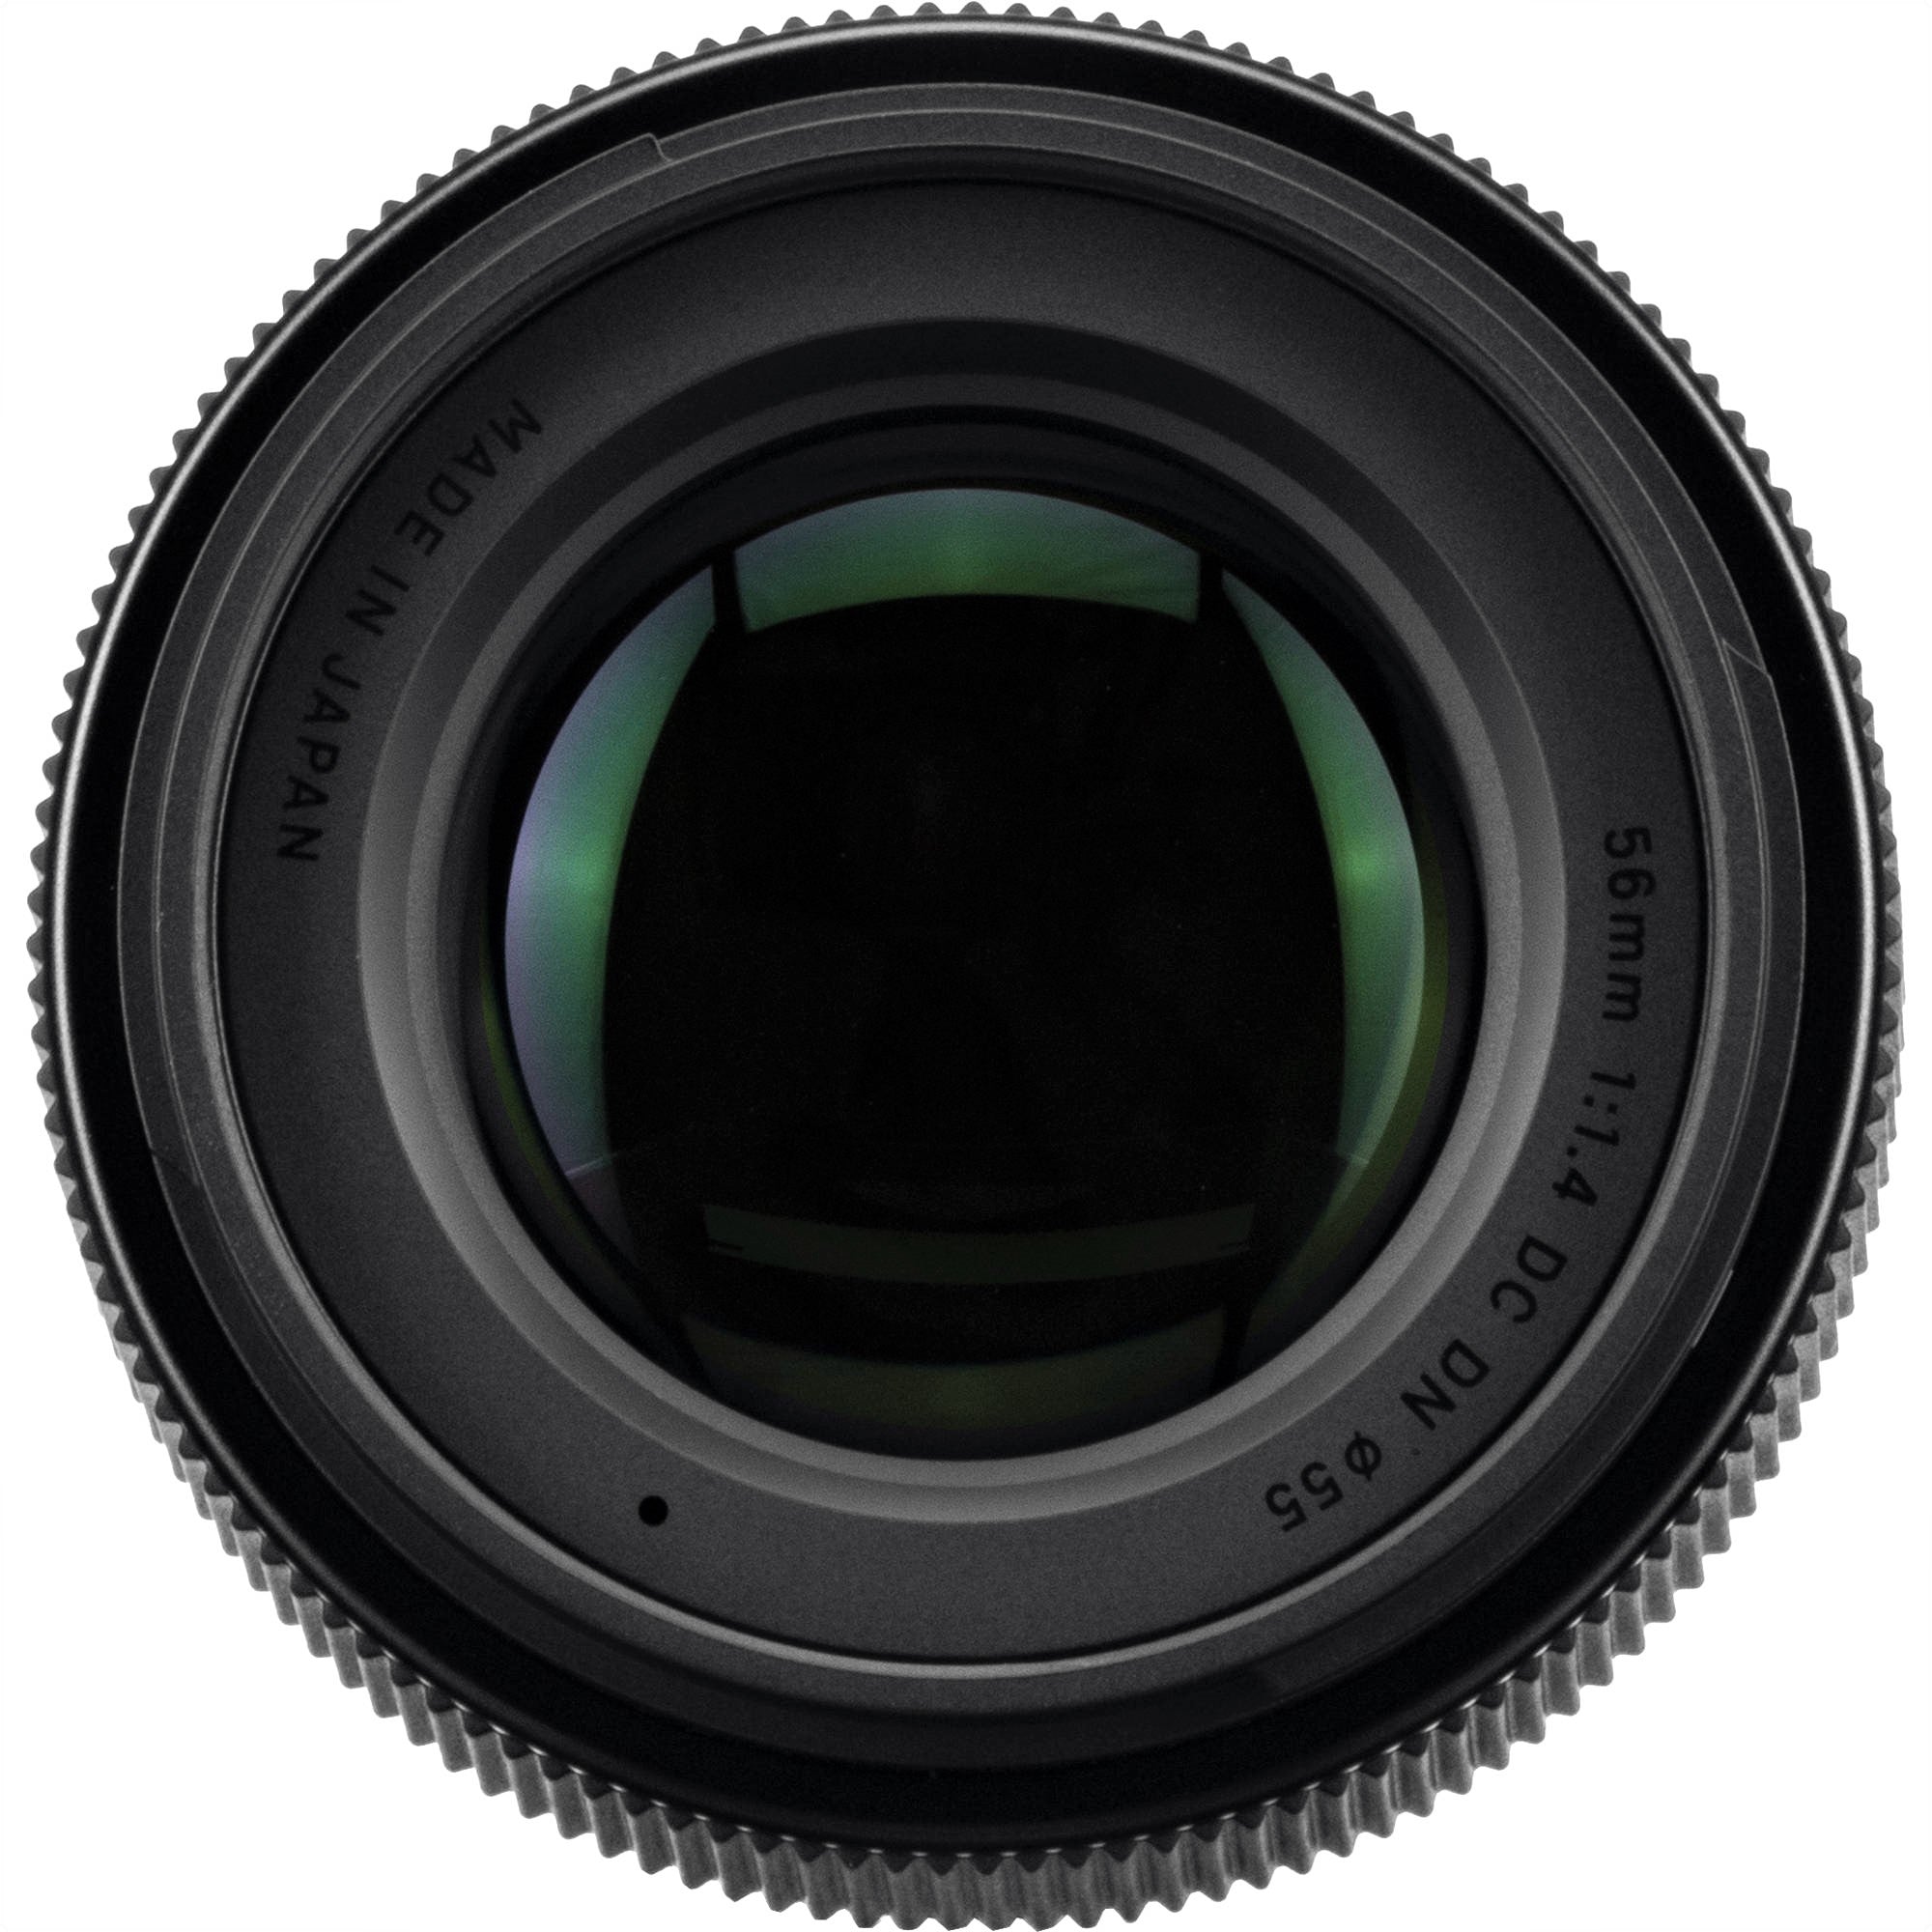 Sigma 56mm F1.4 DC DN Contemporary Lens for FUJIFILM X - Front View